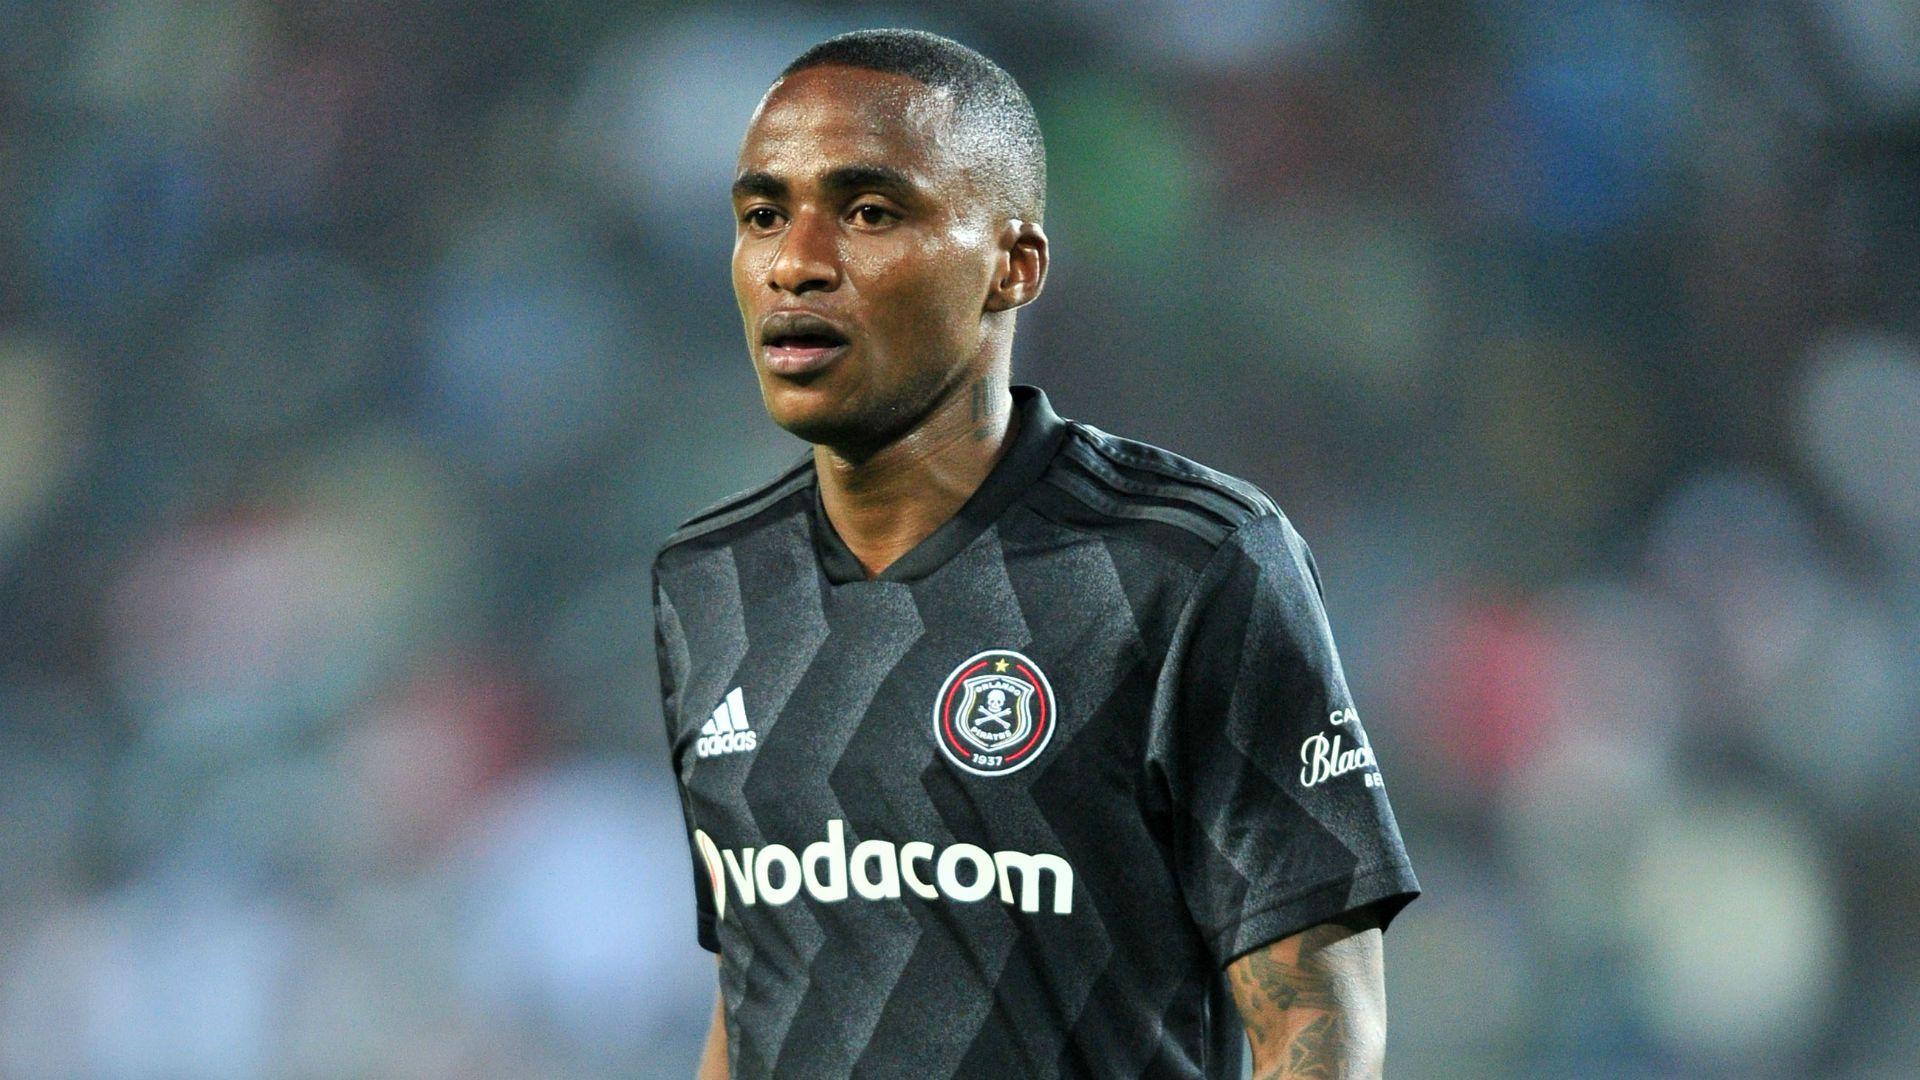 Orlando Pirates announce Player of the Month nominees